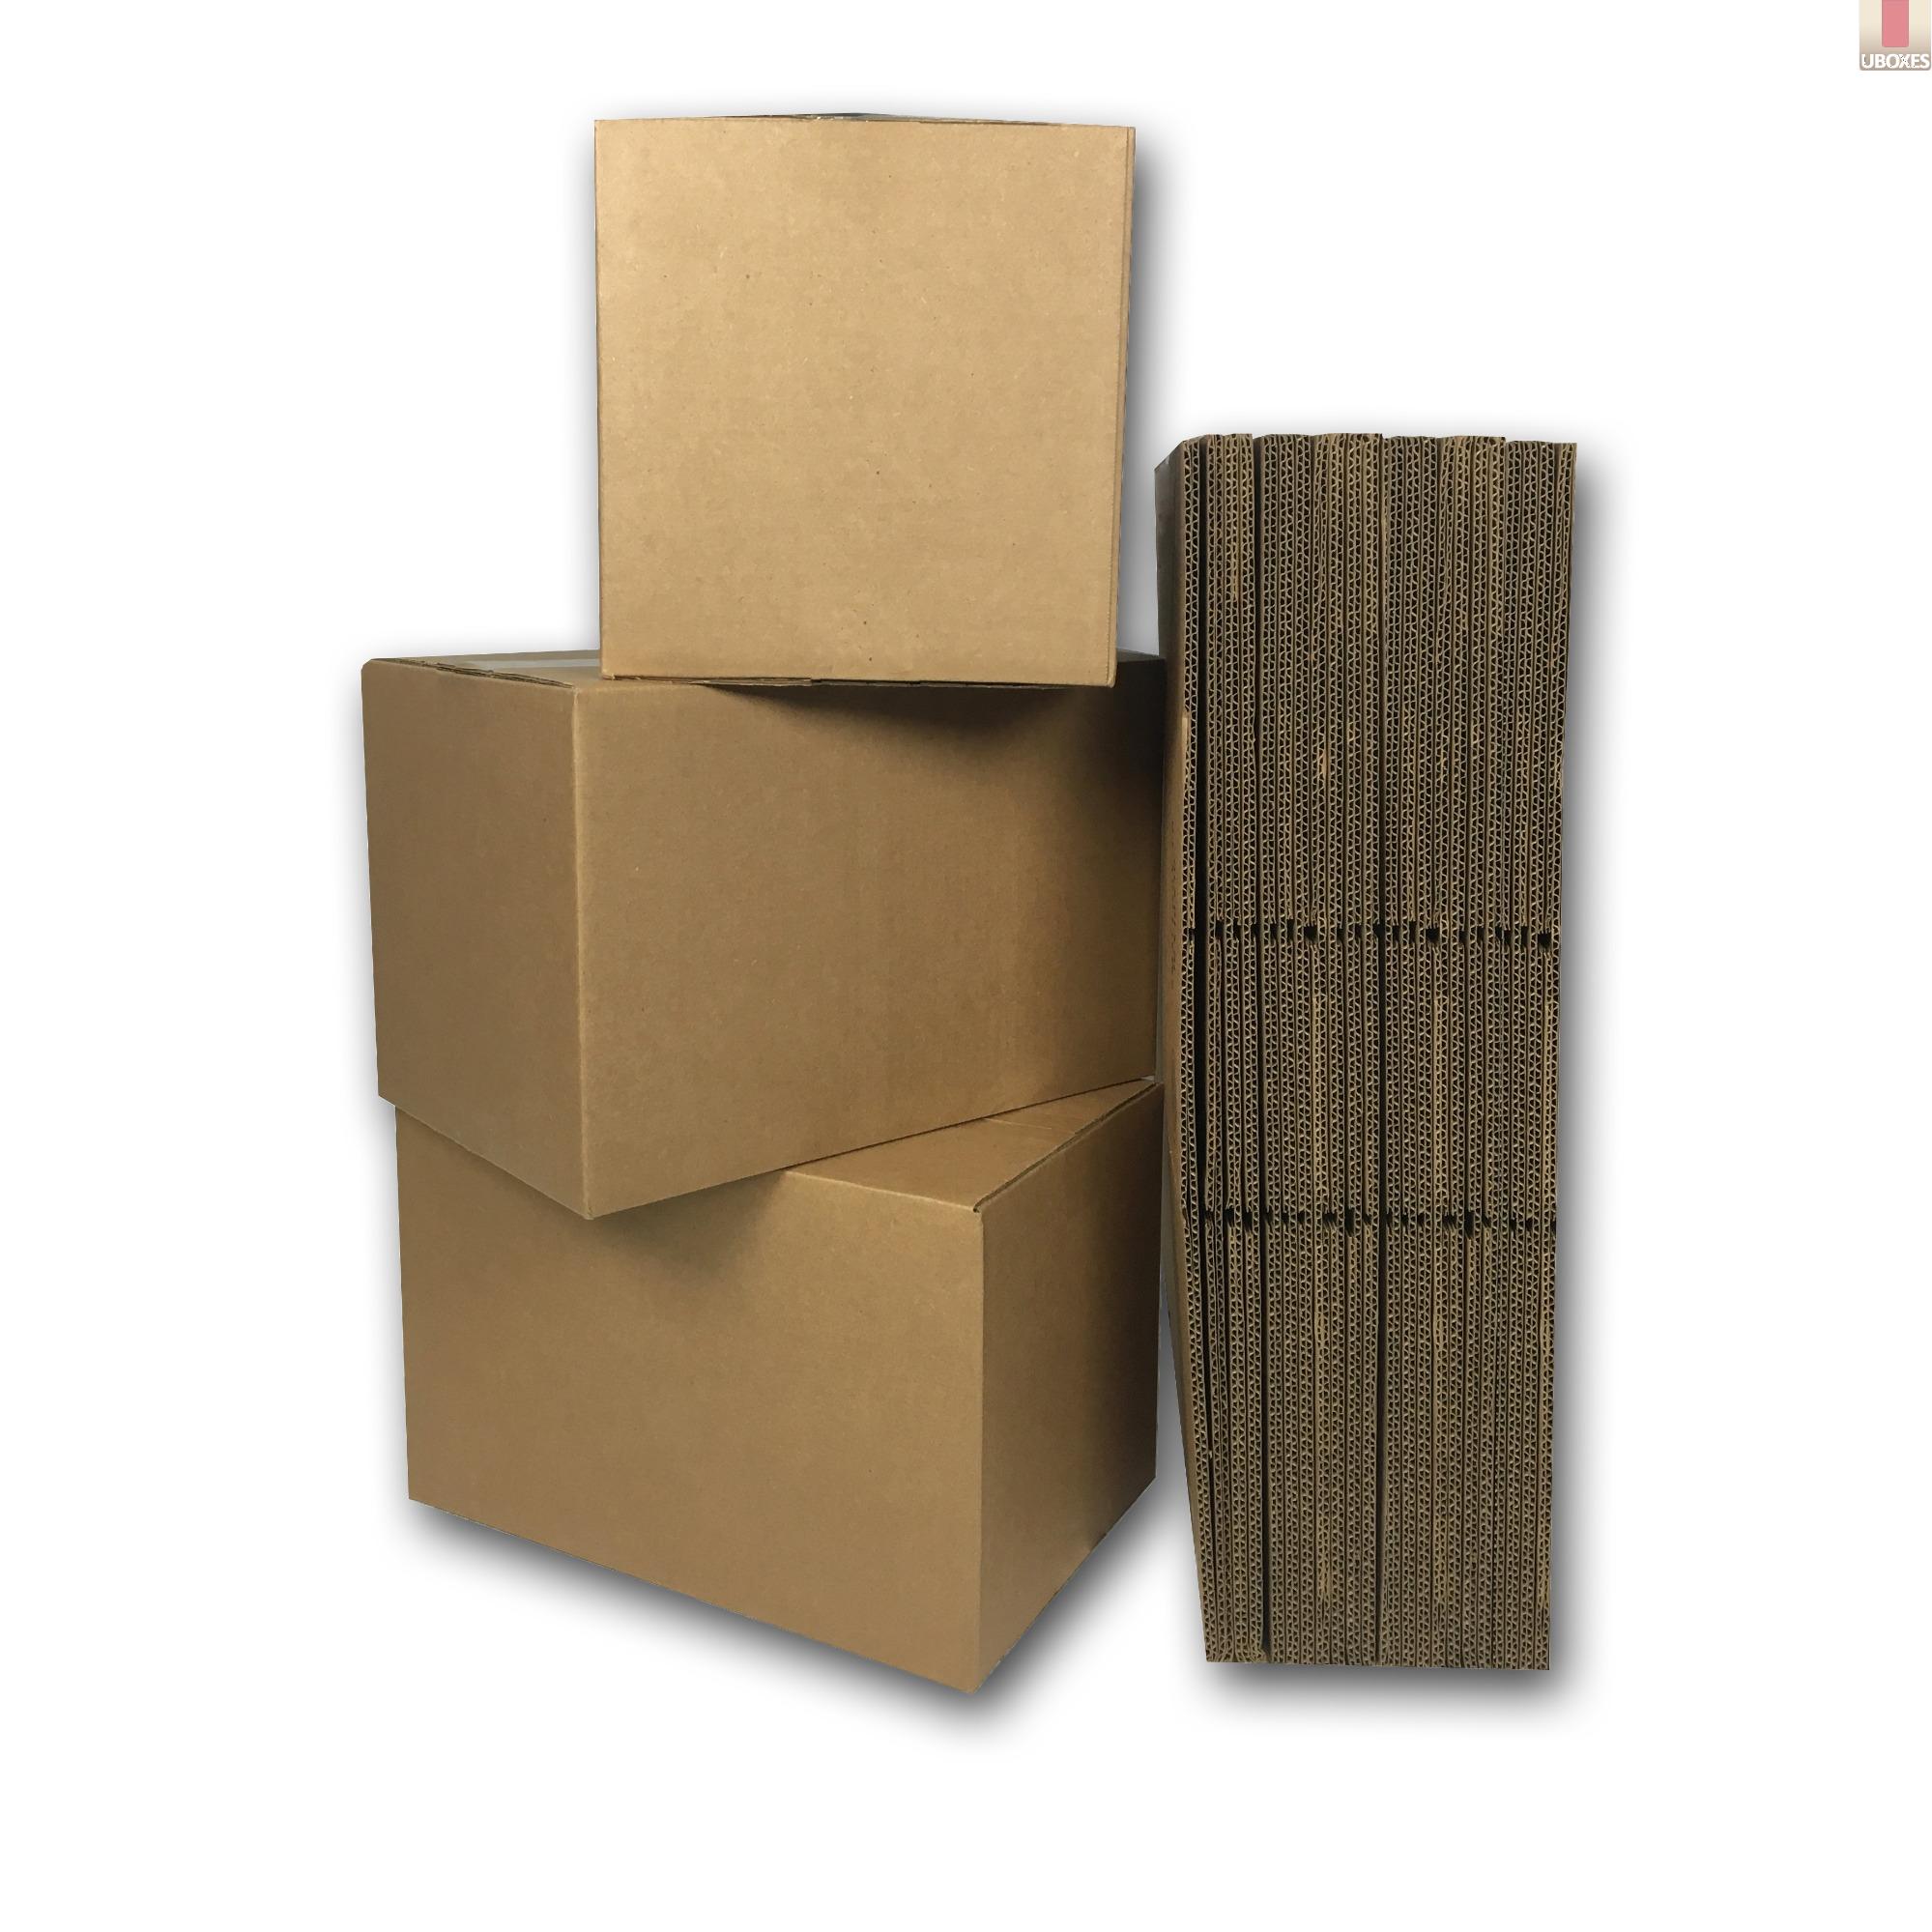 uBoxes Small Moving Boxes (25 Pack) Size 16x10x10